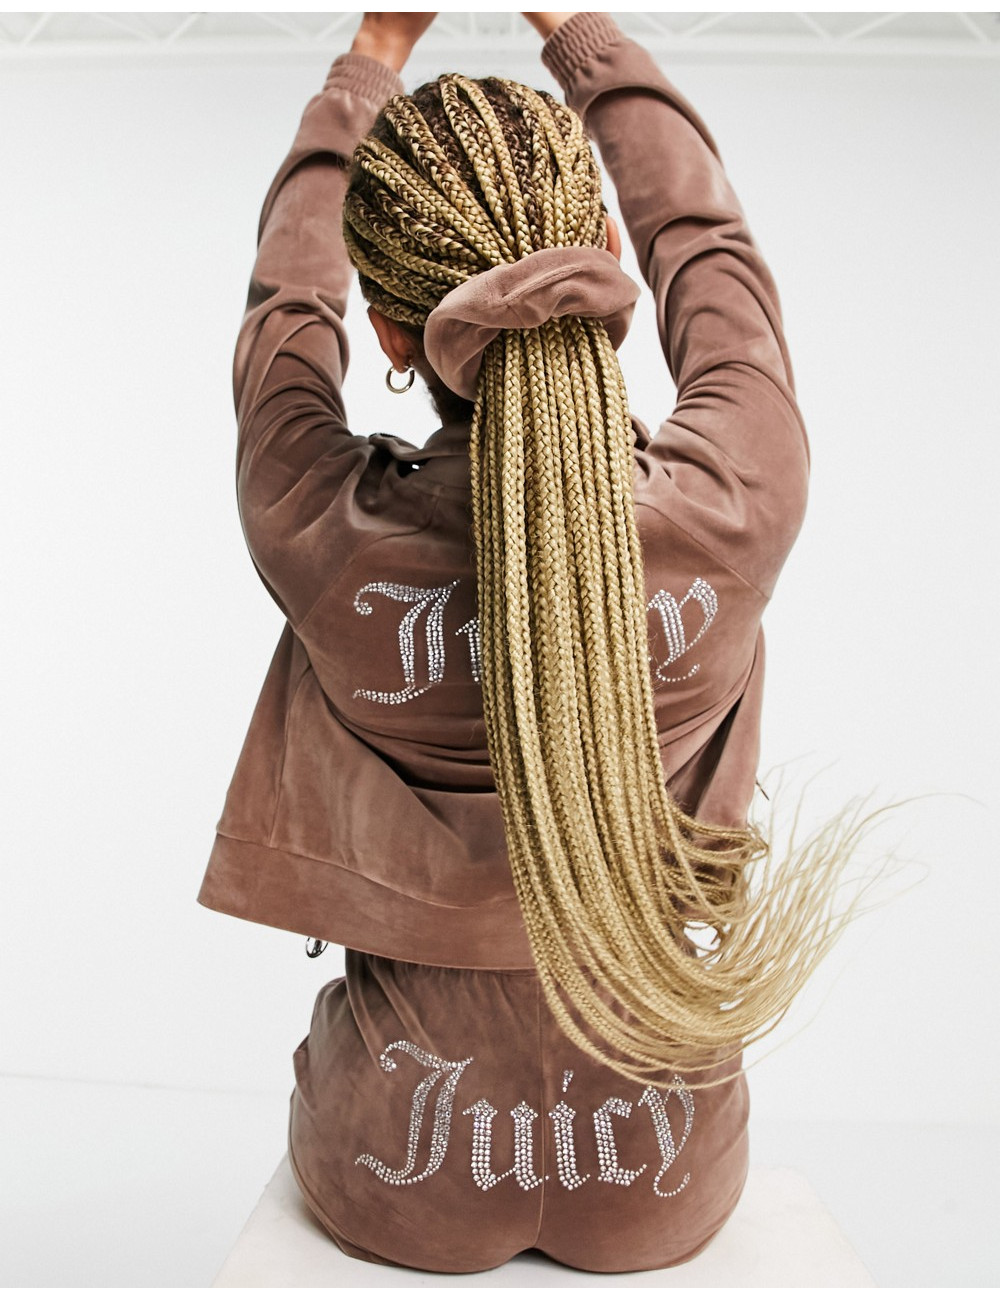 Juicy Couture X ASOS hair...